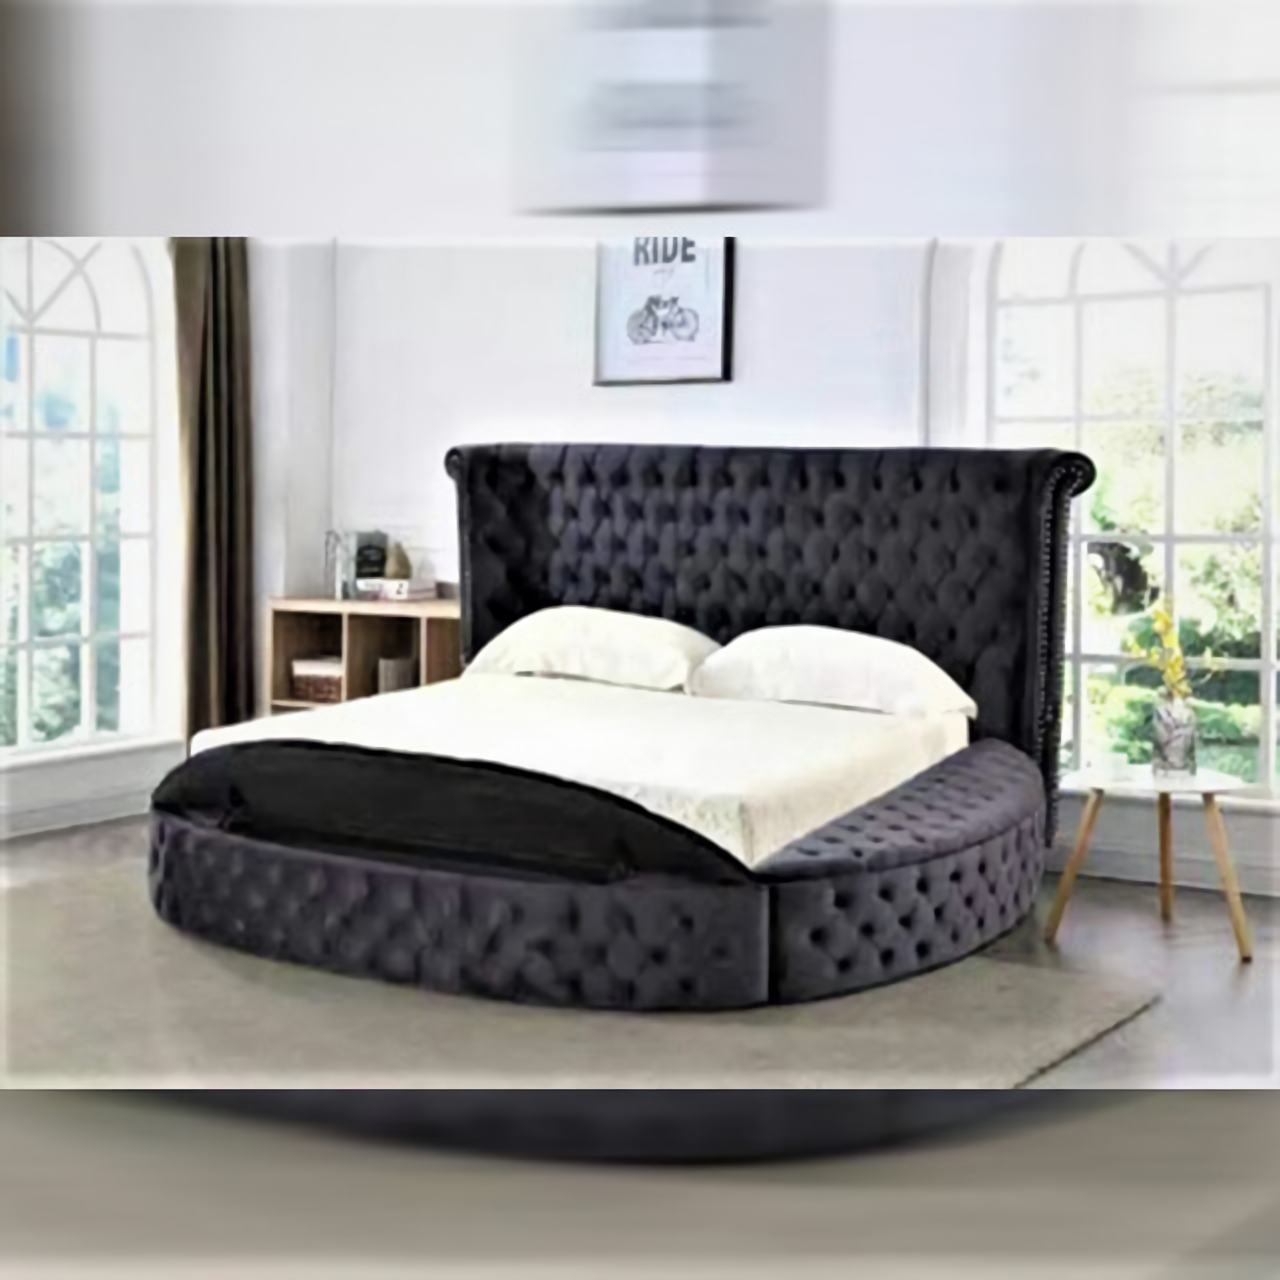 Black Storage Bed With Bluetooth Speakers and USB Chargers